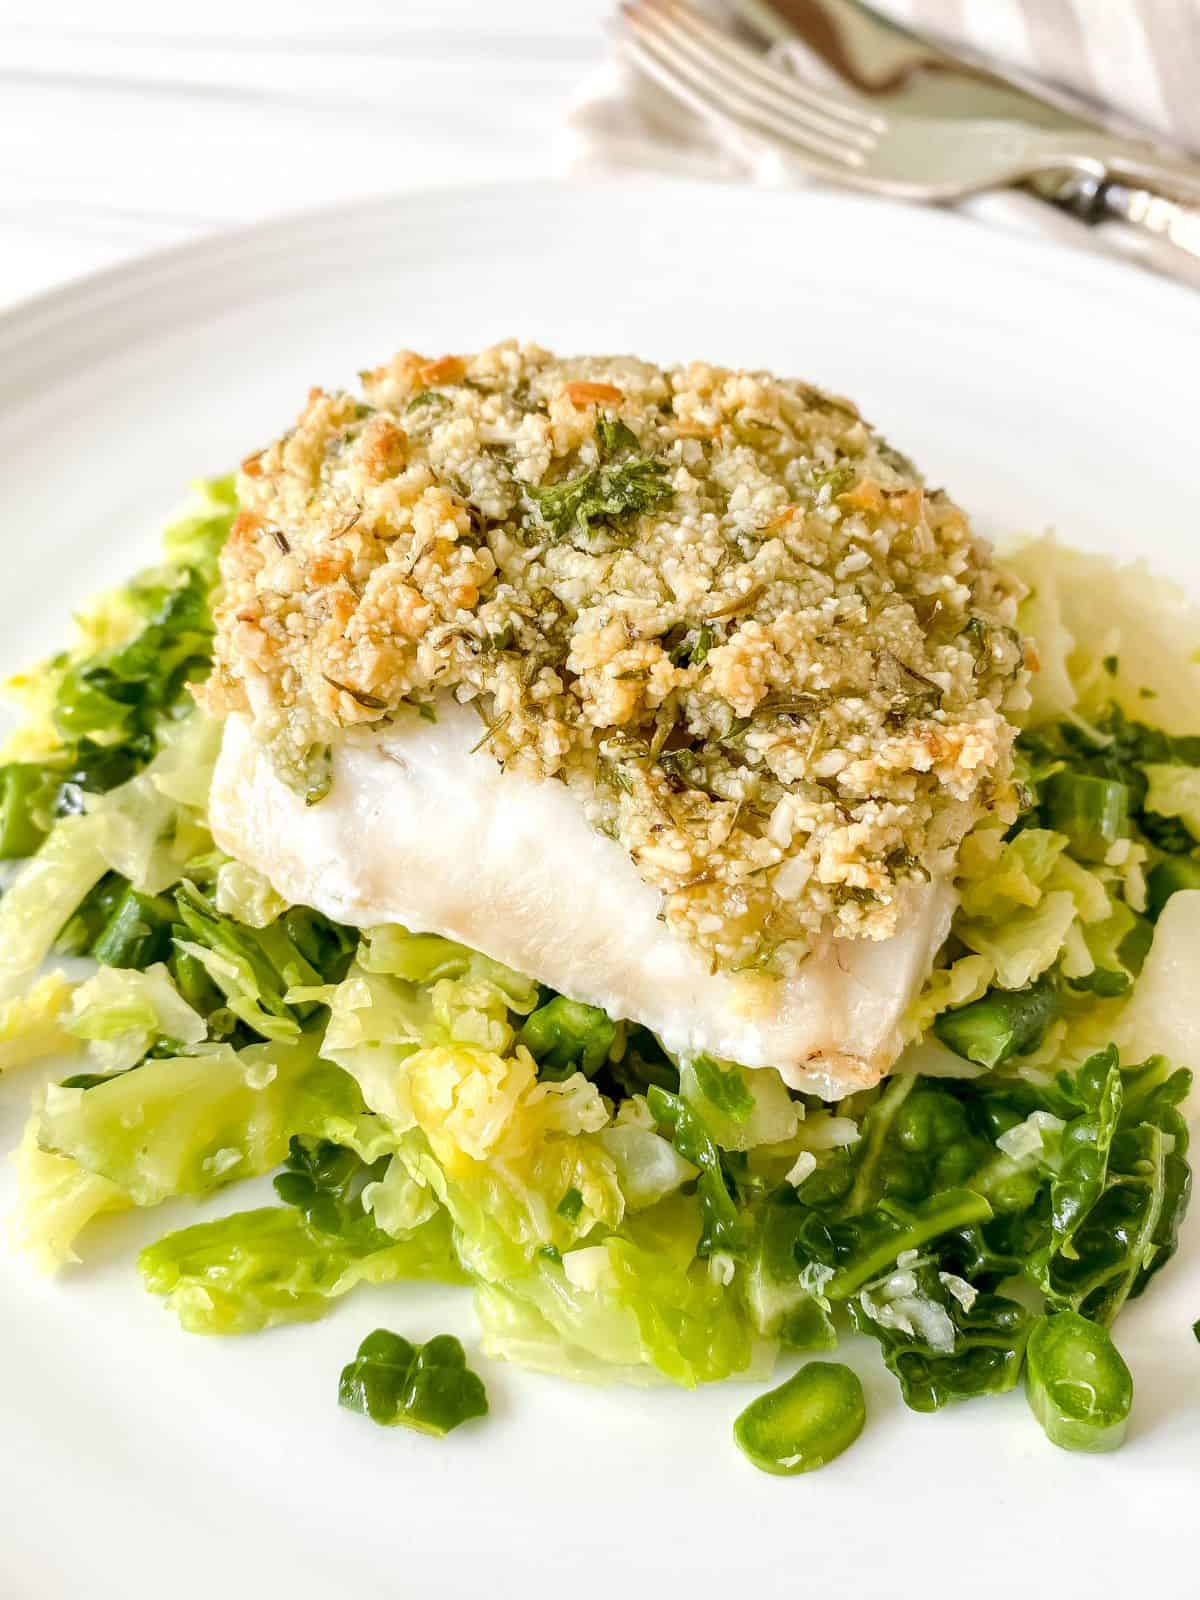 almond crusted cod on a bed of cabbage on a white plate.